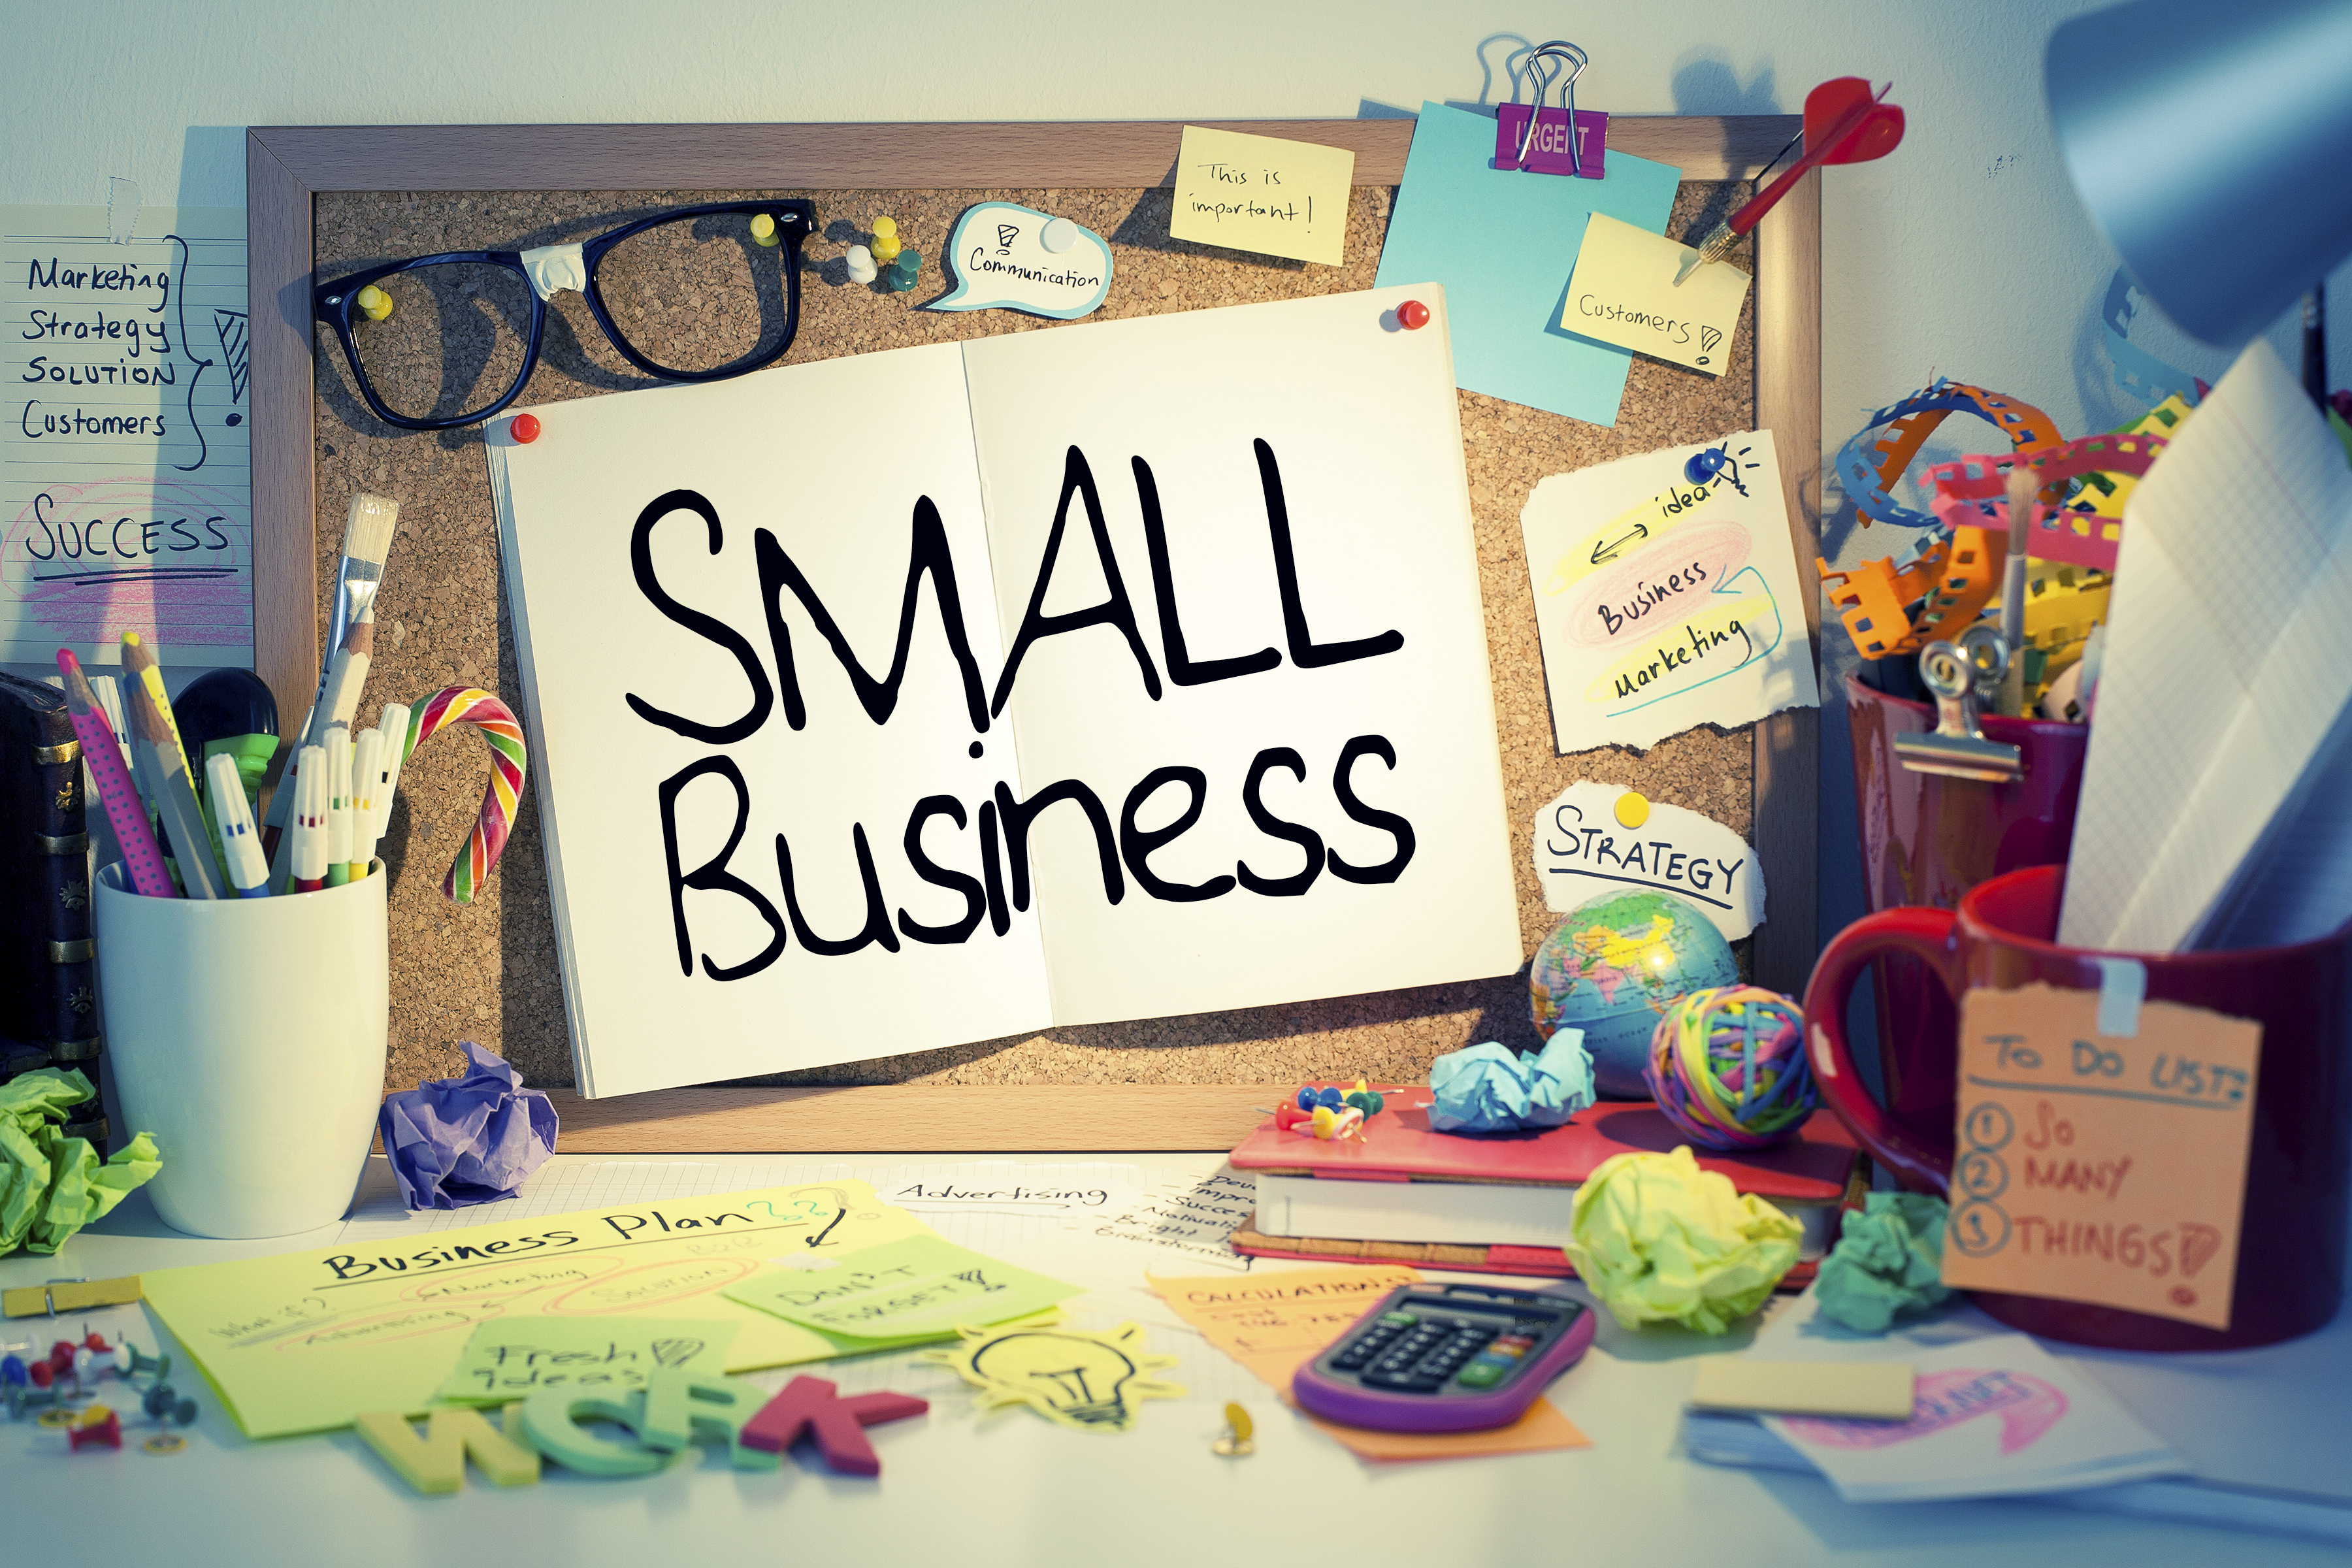 David vs. Goliath: 3 Secrets to help Small Business Owners Compete with Big Business in Raleigh